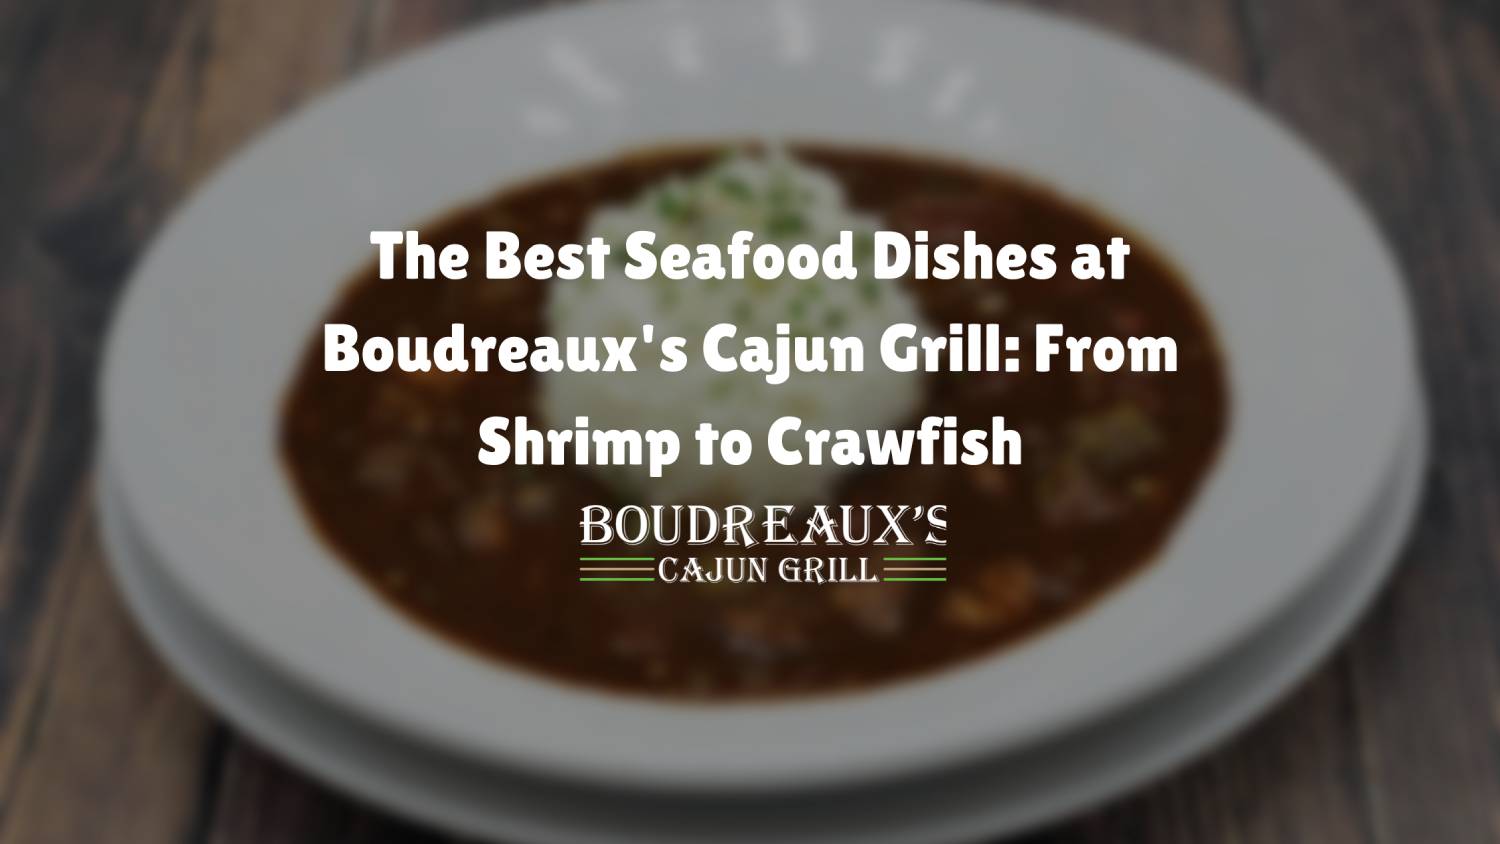 The Best Seafood Dishes at Boudreaux's Cajun Grill: From Shrimp to Crawfish